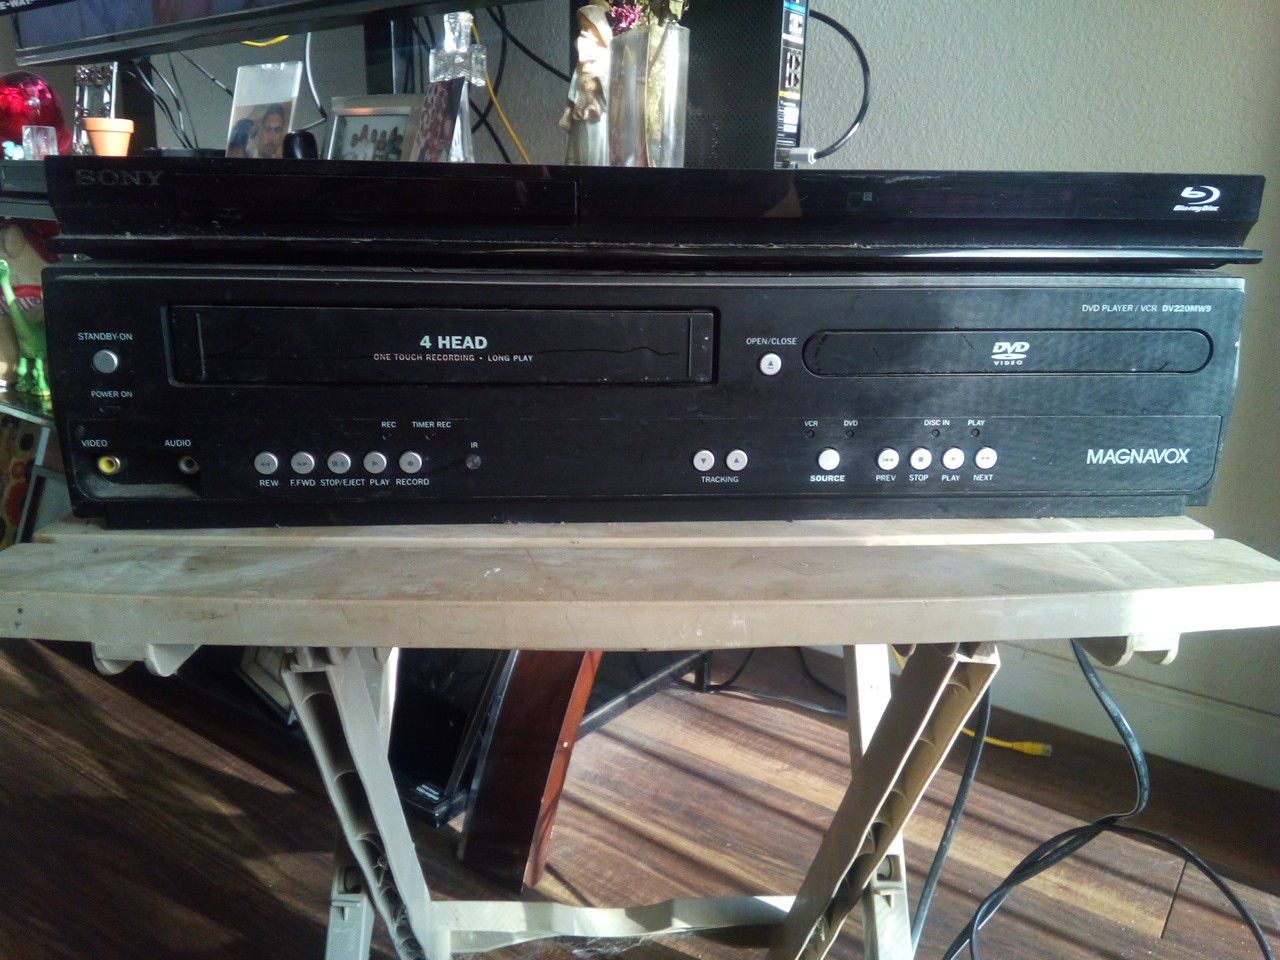 Blue Ray player left